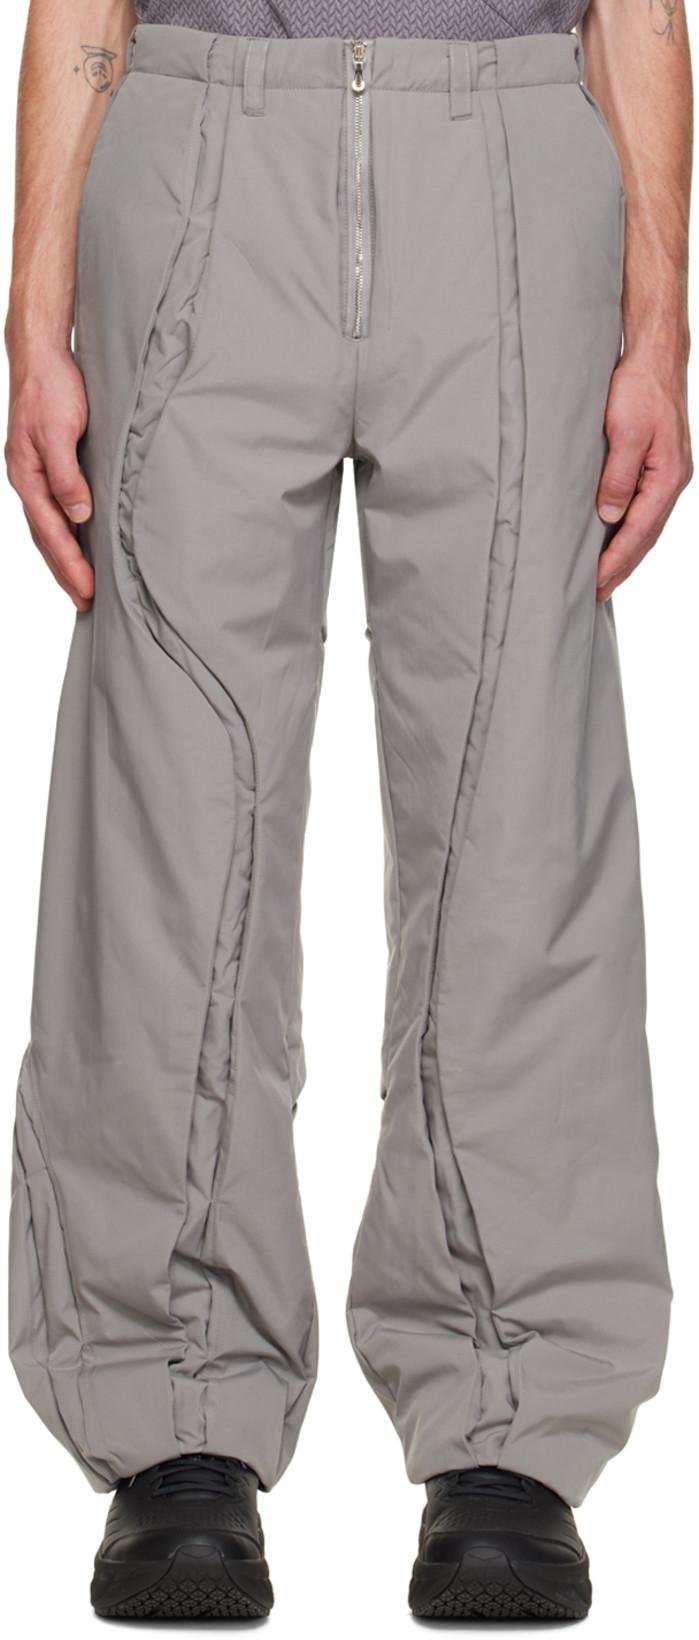 Gray Spin Crevice Trousers by AENRMOUS